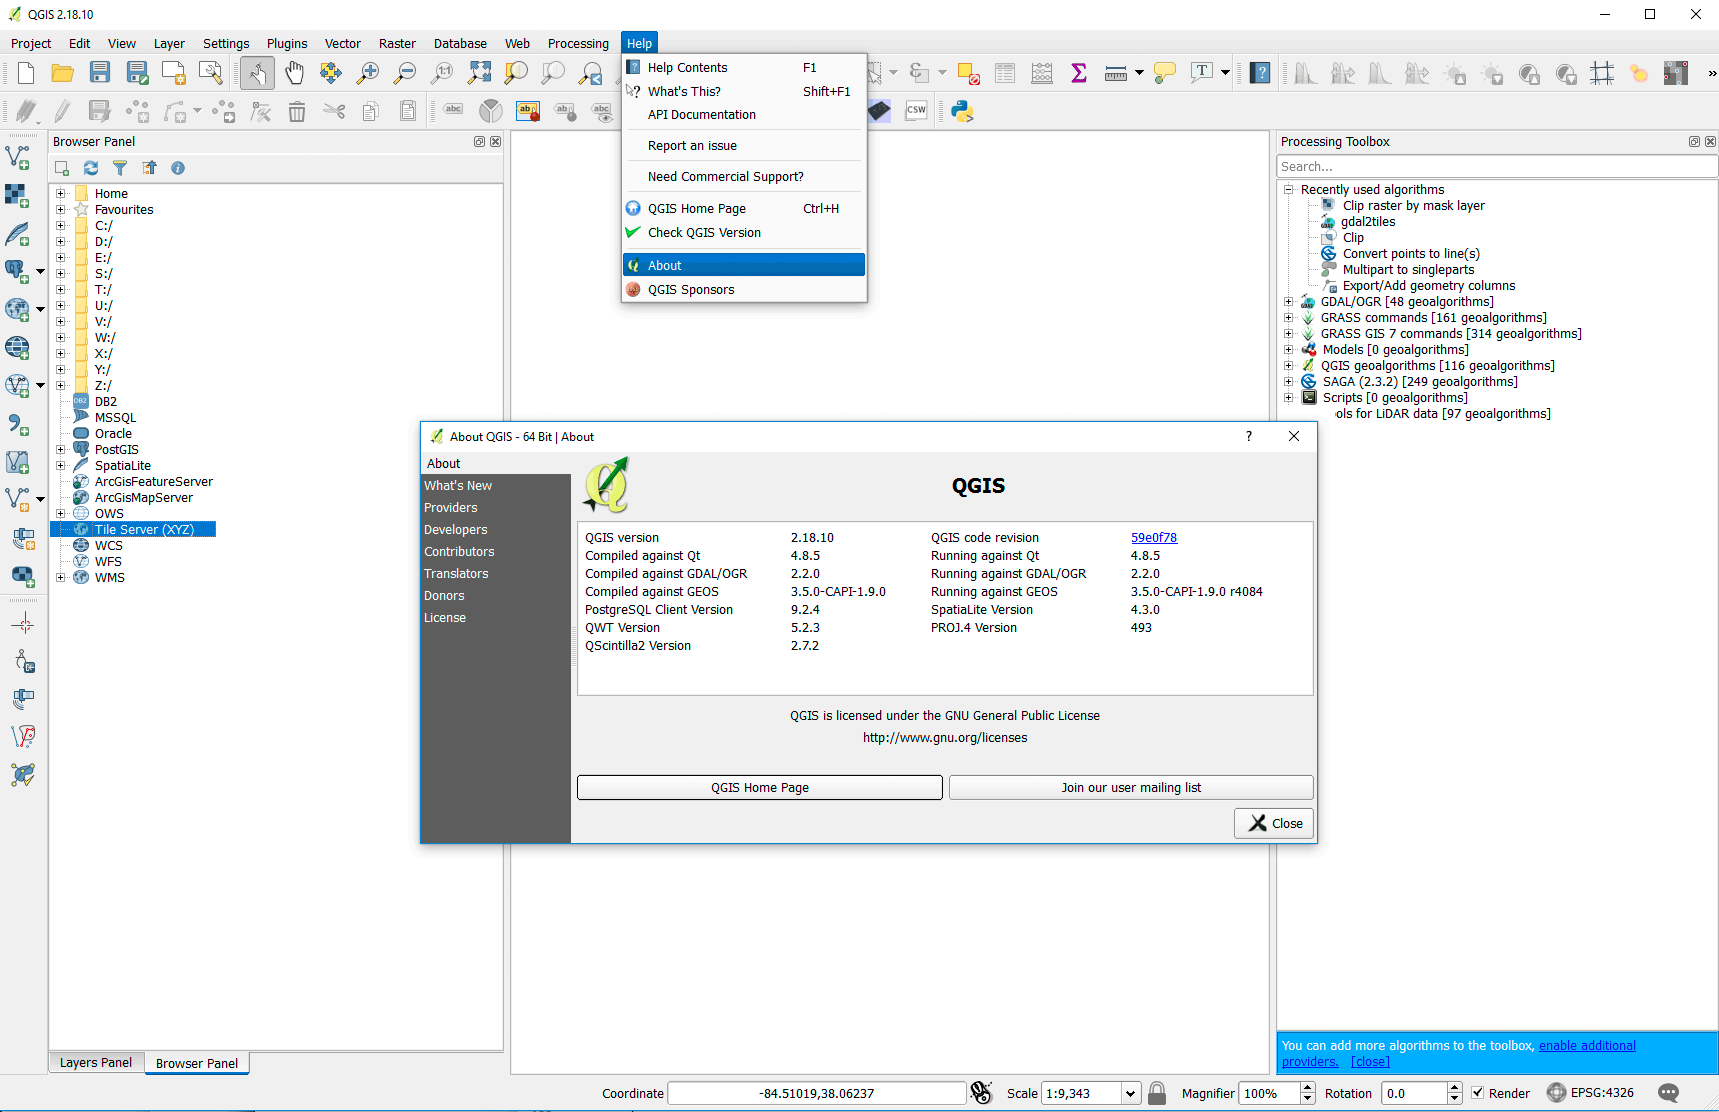 Accessing component information about QGIS